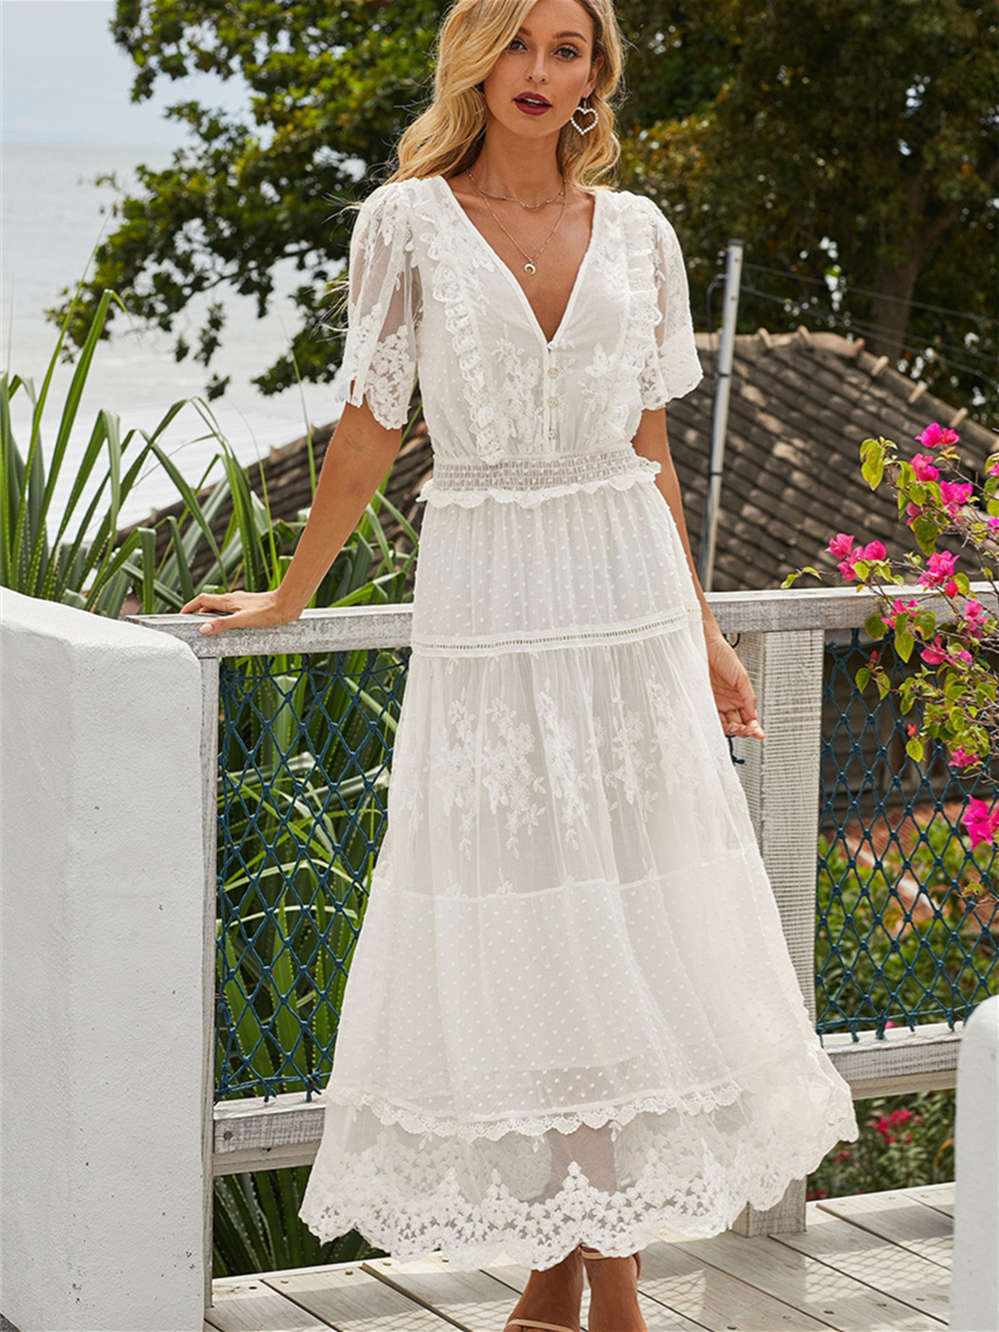 Luminous Dawn Tiered Lace Evening Party Dress Short Sleeves